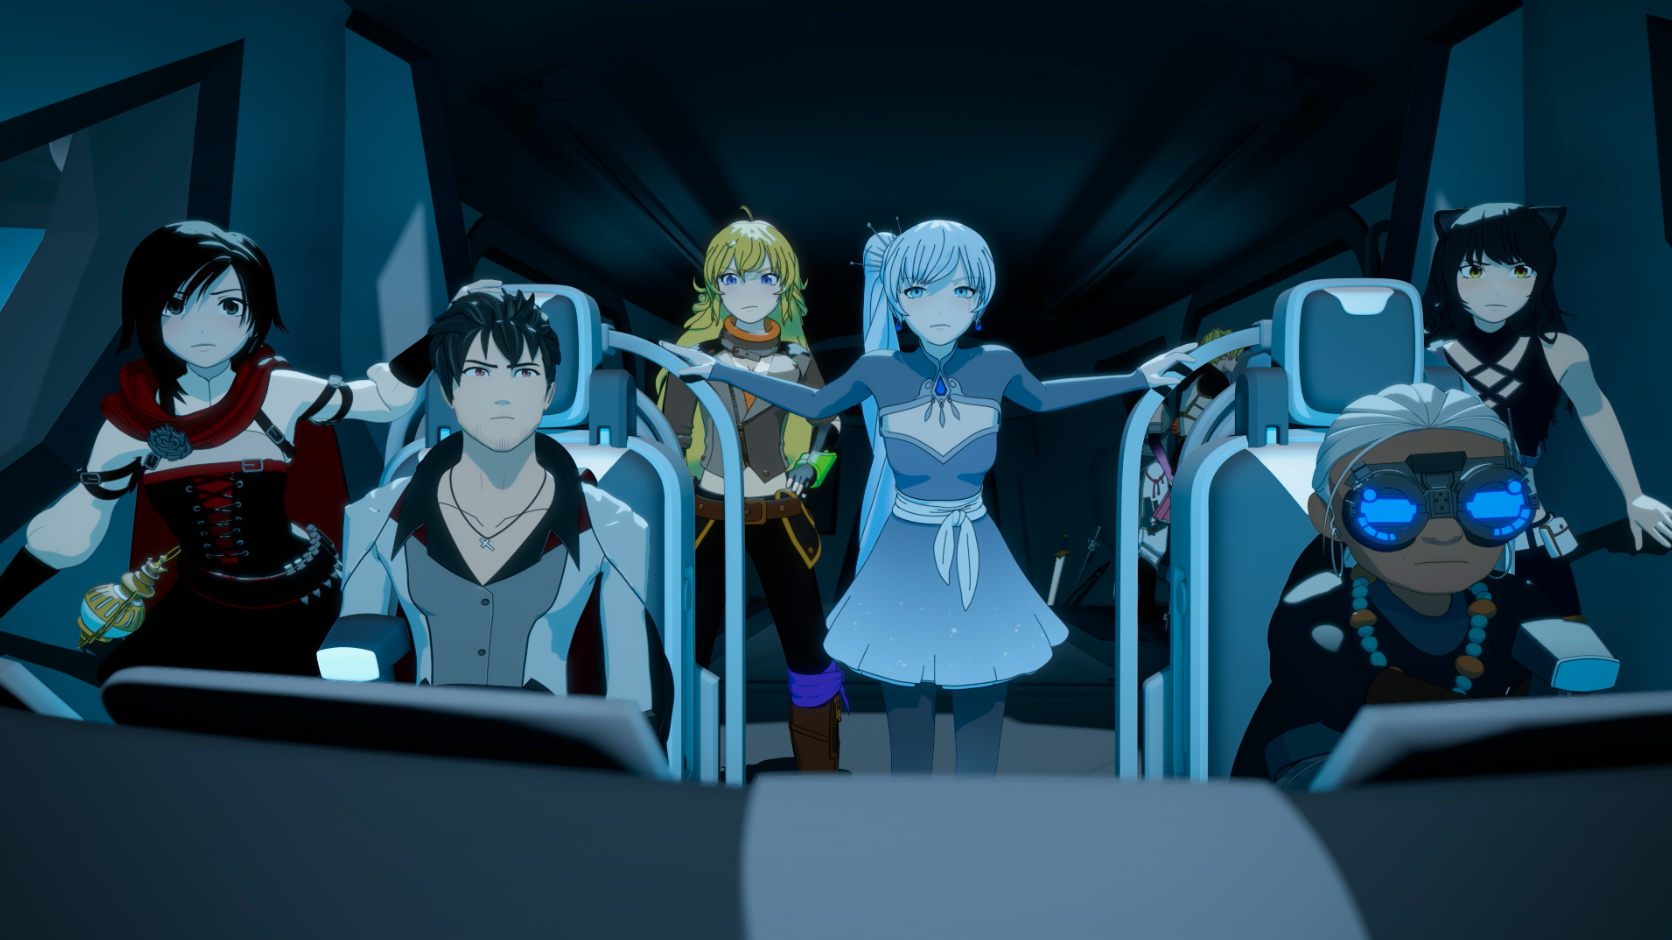 Rwby Volume 7 Trailer And Footage Shown At Nycc 2019 Panel